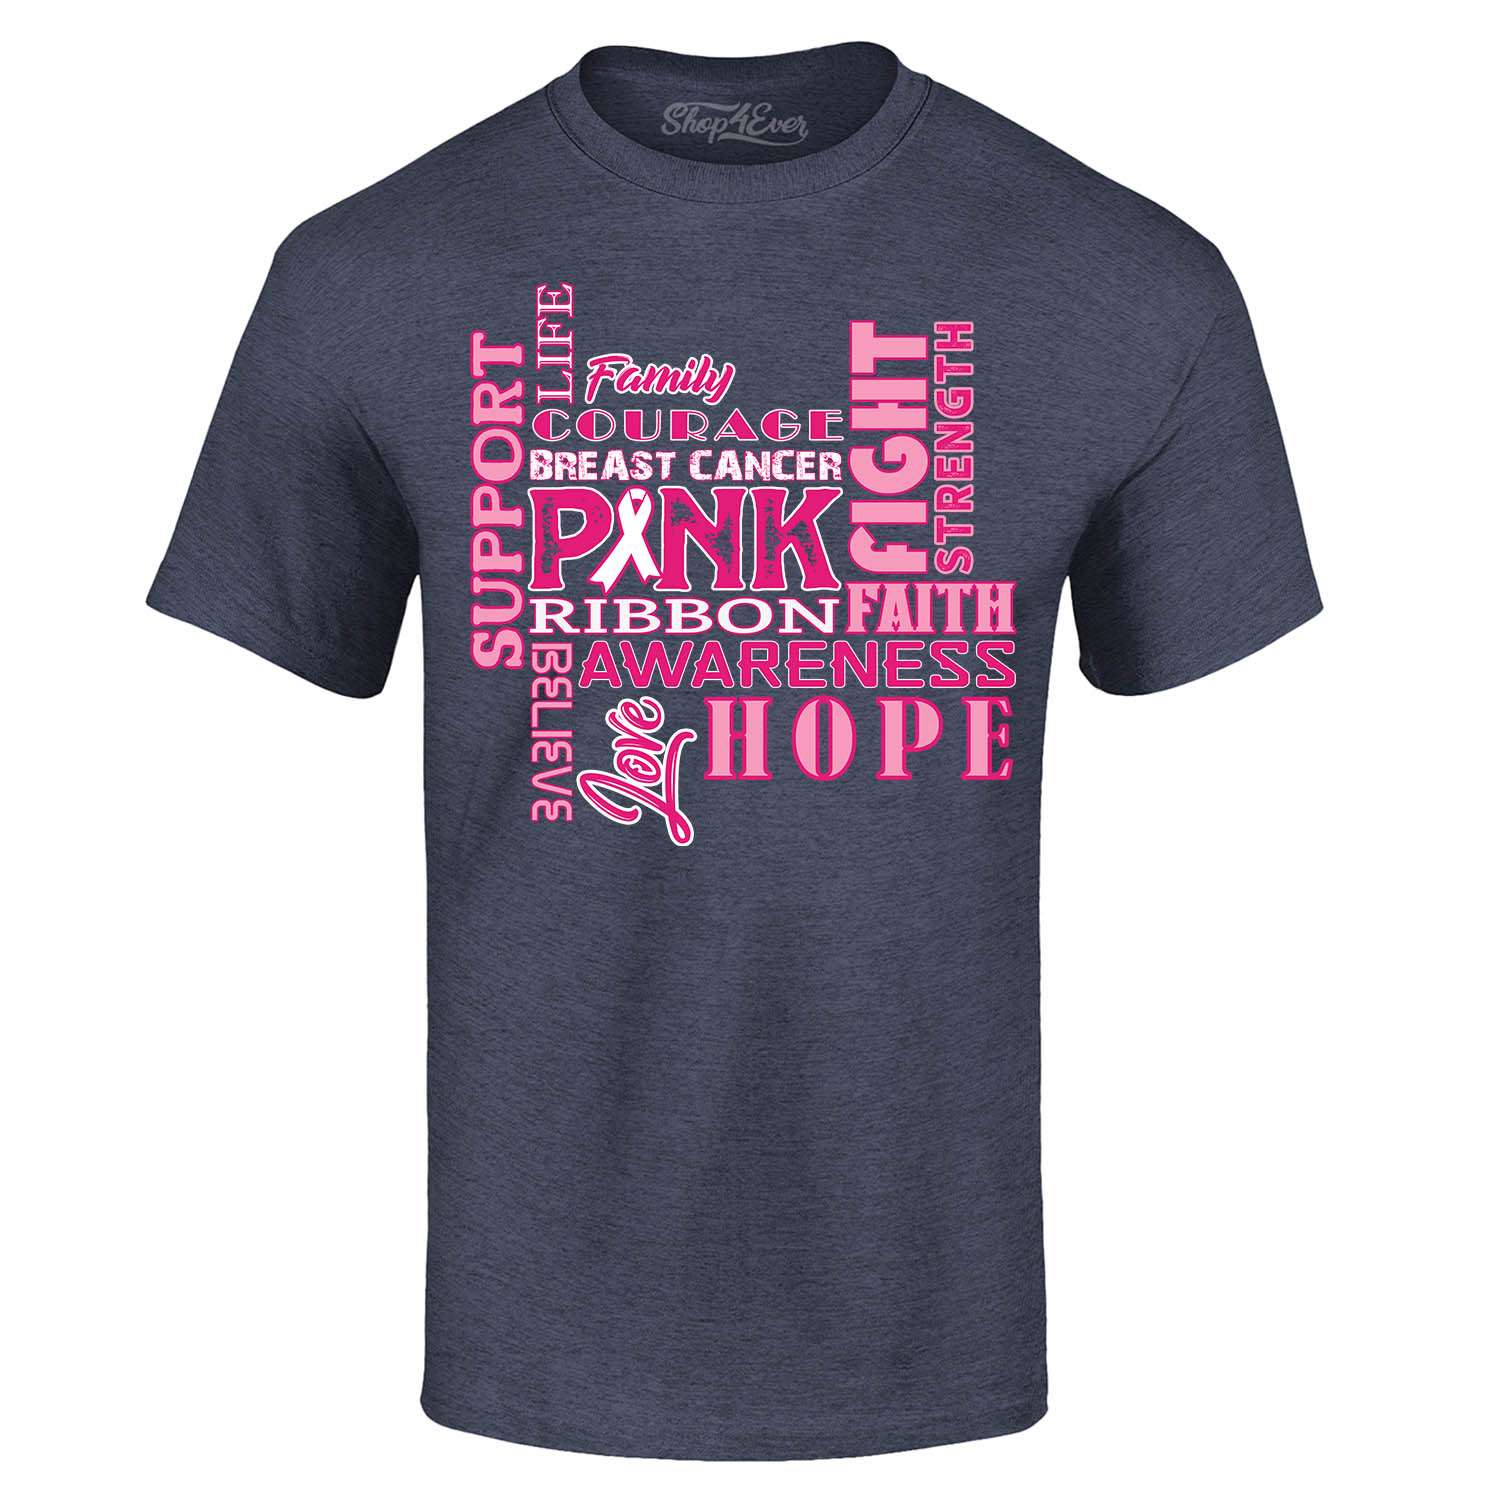 Breast Cancer Awareness Montage T-shirt Pink Ribbon Support Hope Fight Shirts